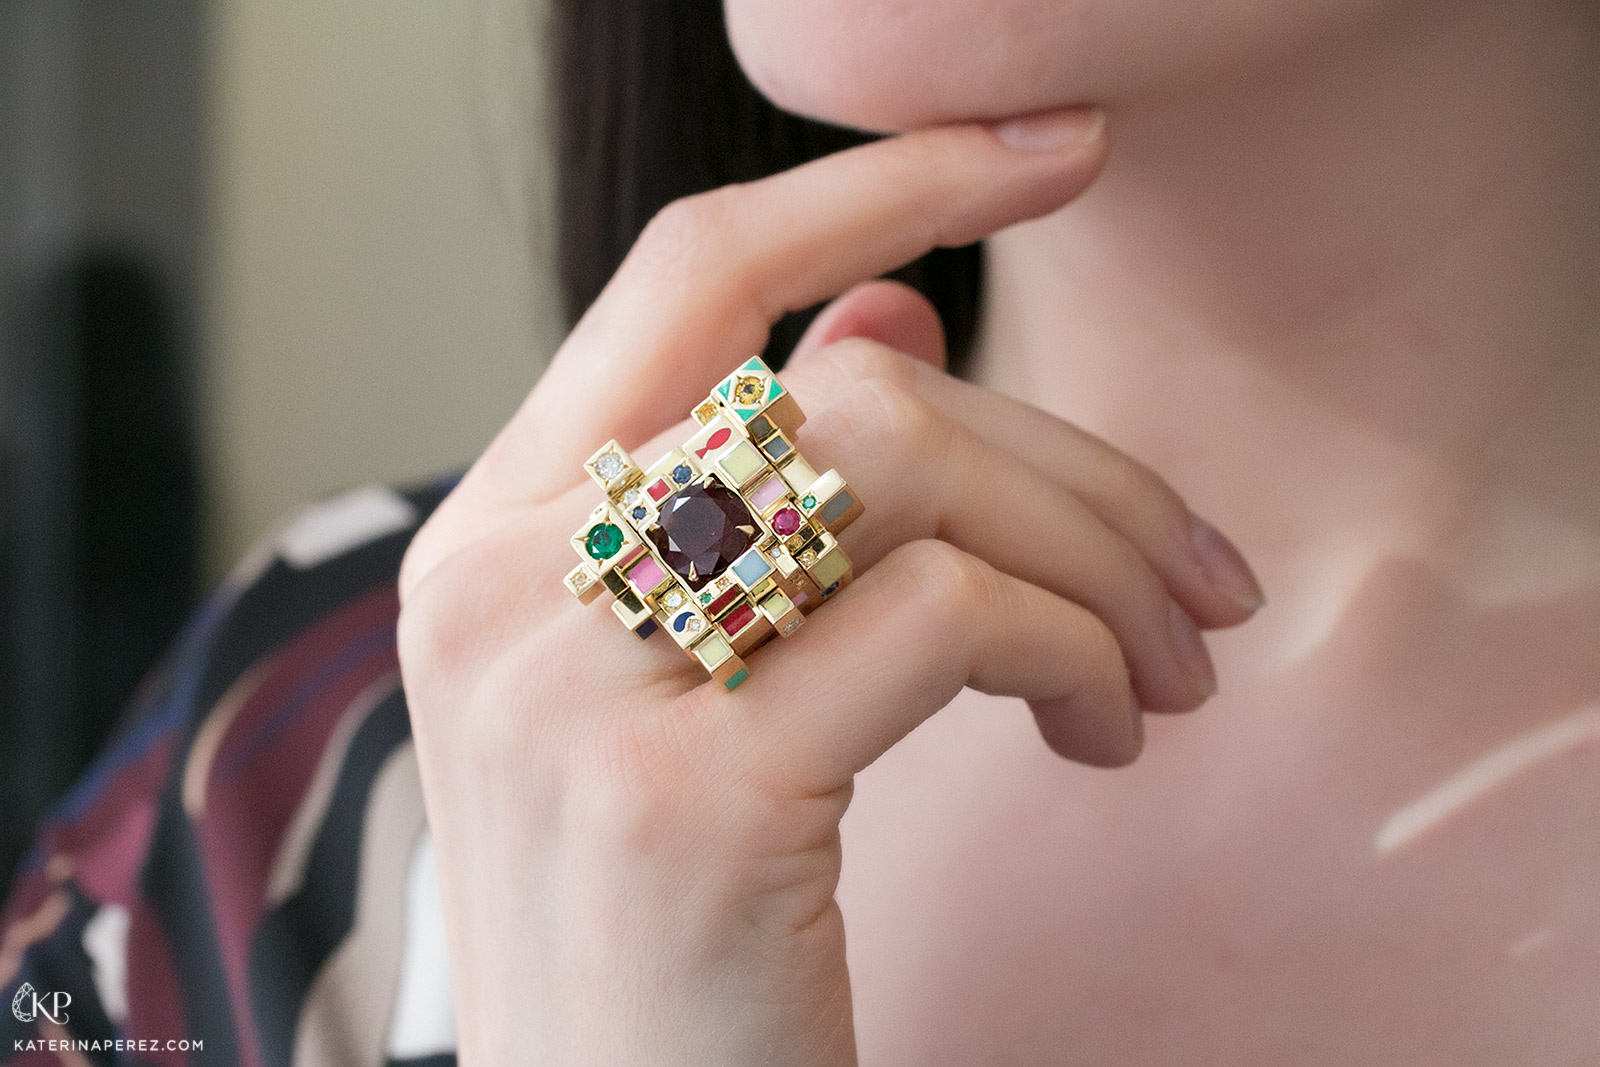 Aisha Baker Pixel ring in yellow gold with enamel and gemstones